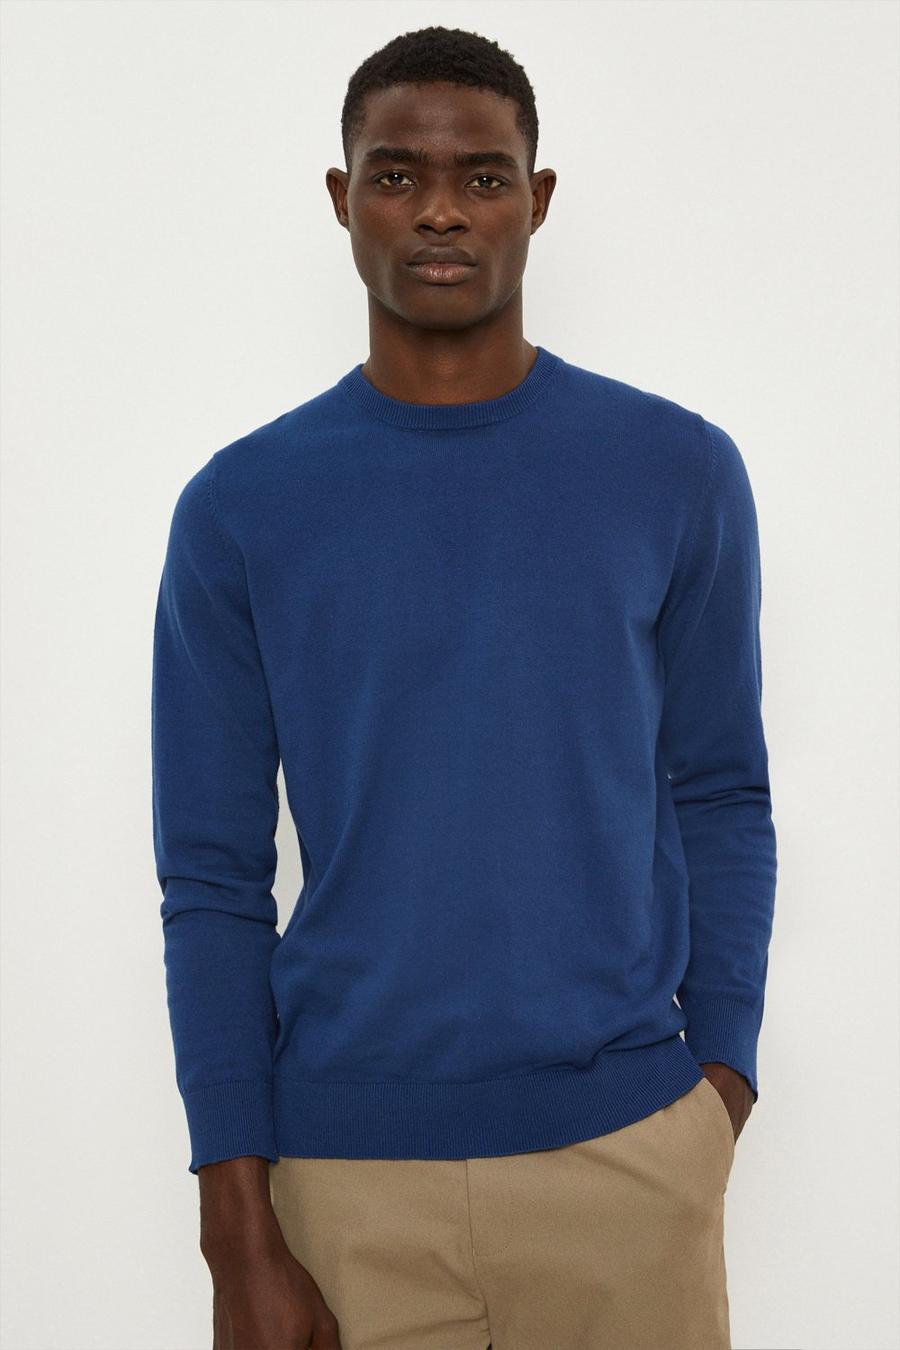 Knitted Crew Neck Royal Blue Jumper